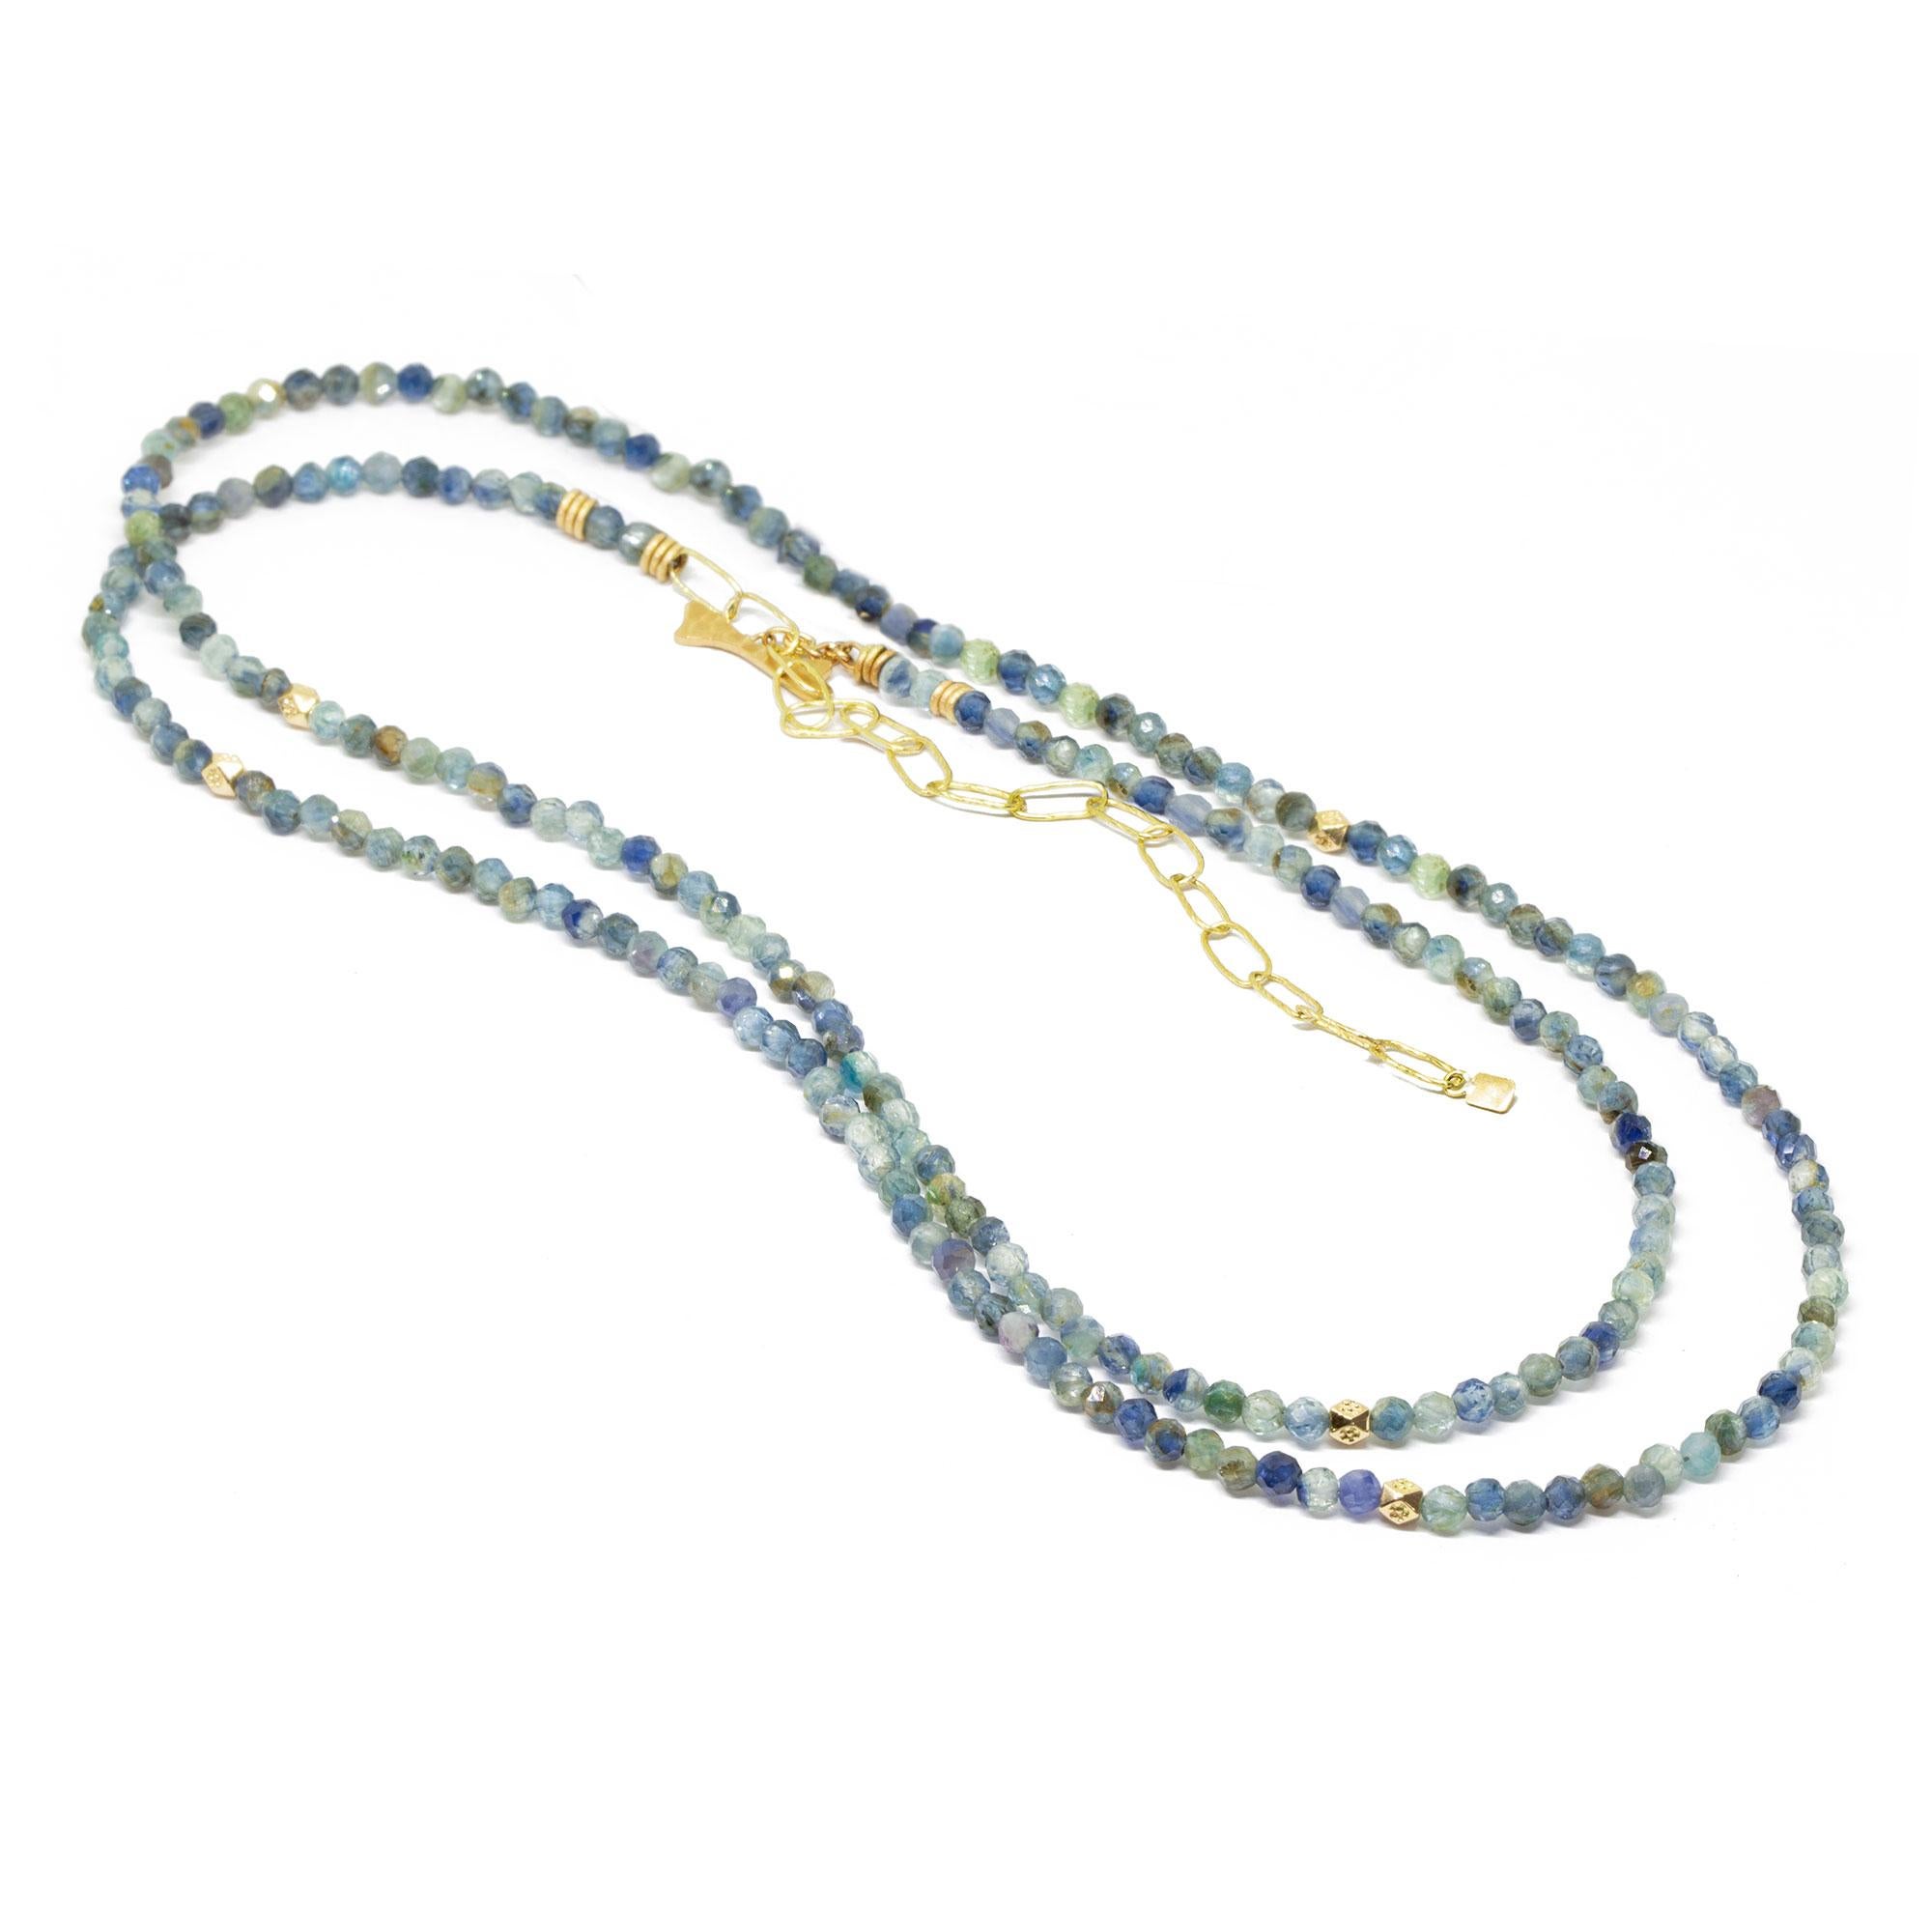 The best part about our Chloe Gold Gemstone Convertable Wrap isn’t just that it can be worn long, doubled-up, or as a wrap bracelet (although that’s pretty cool). It’s that you can thread any of our Charms onto the kyanite beads—have fun playing